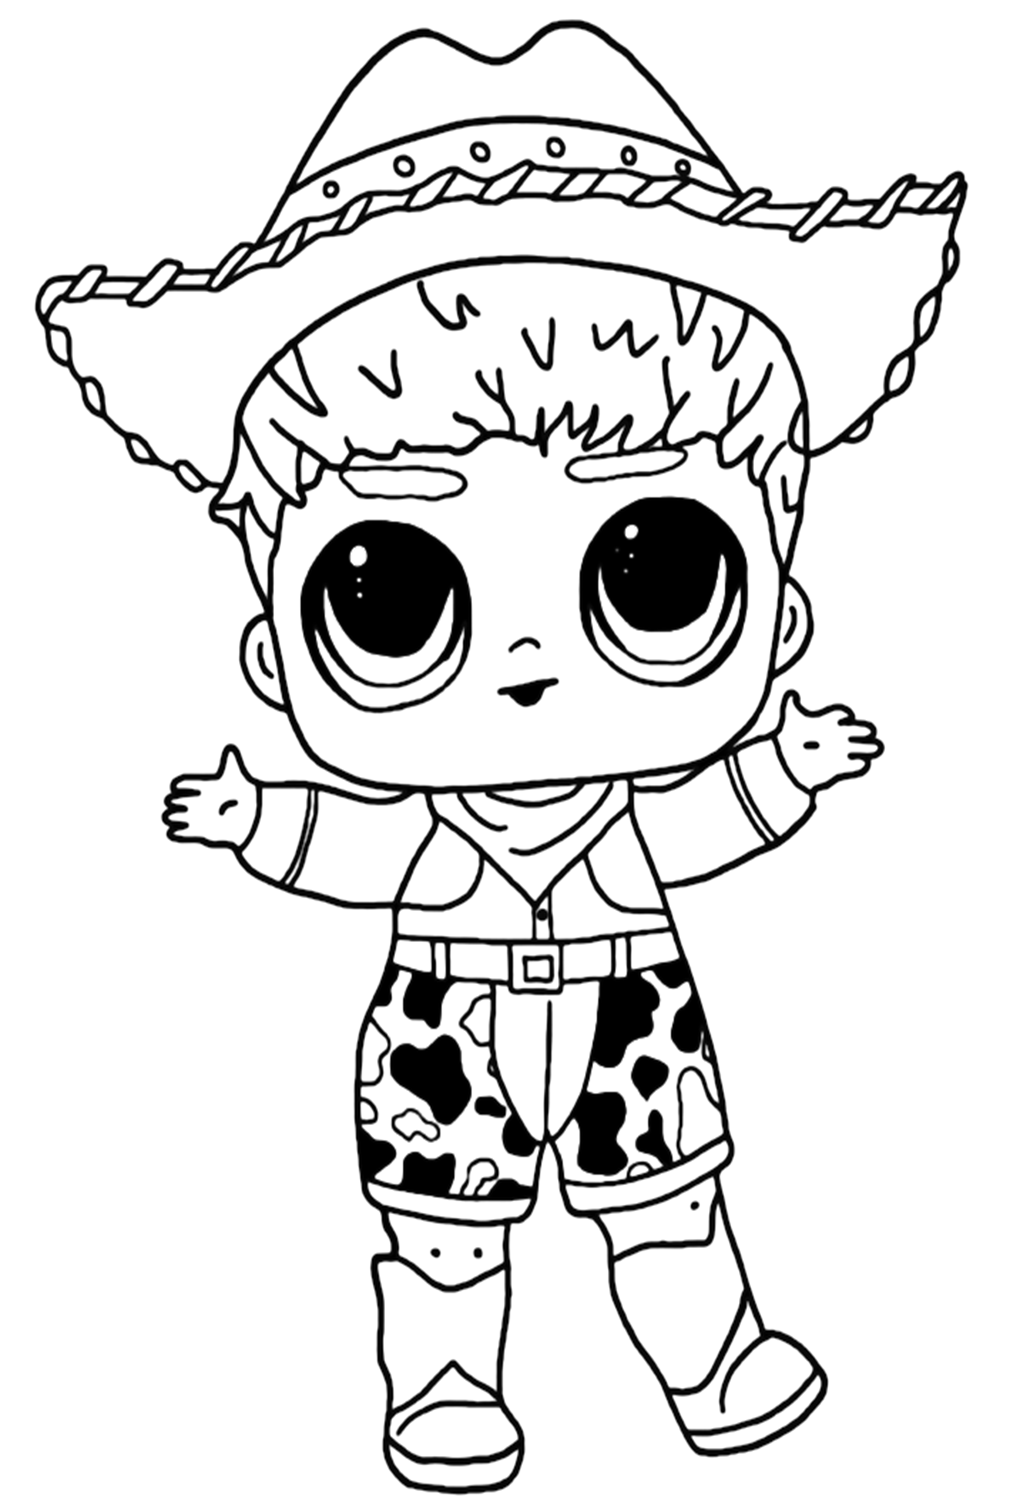 Lol Suprise Doll Do-si-dude Coloring Pages